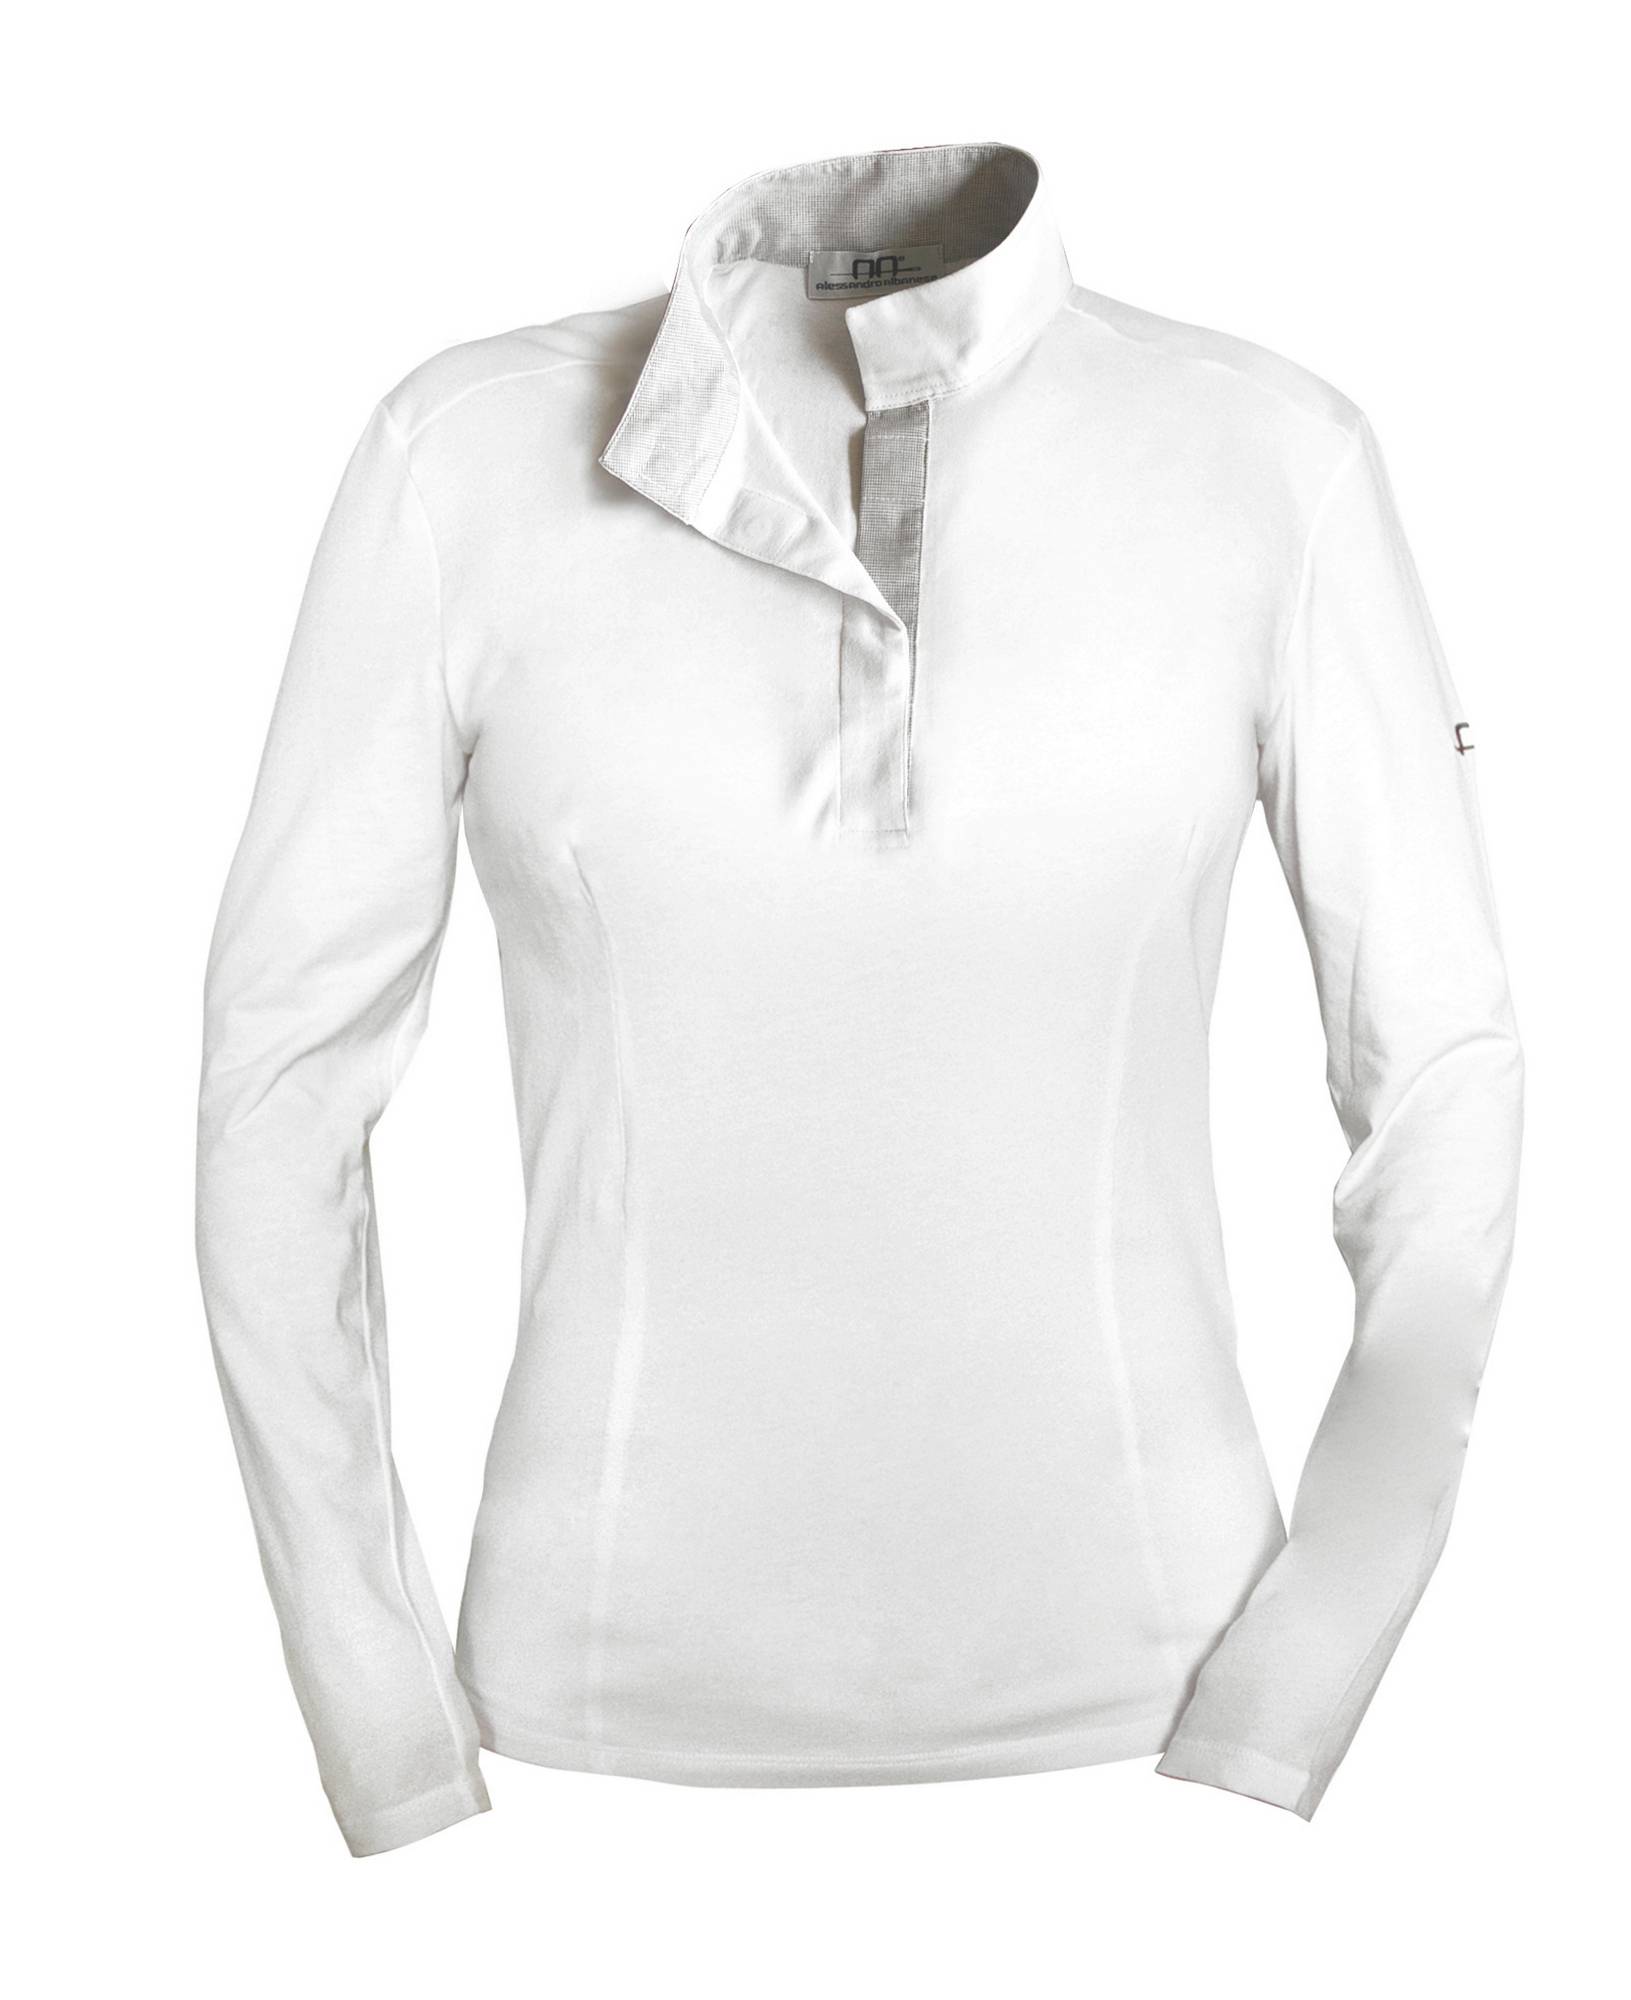 Alessandro Albanese Free Button Ladies Shirt Long Sleeve